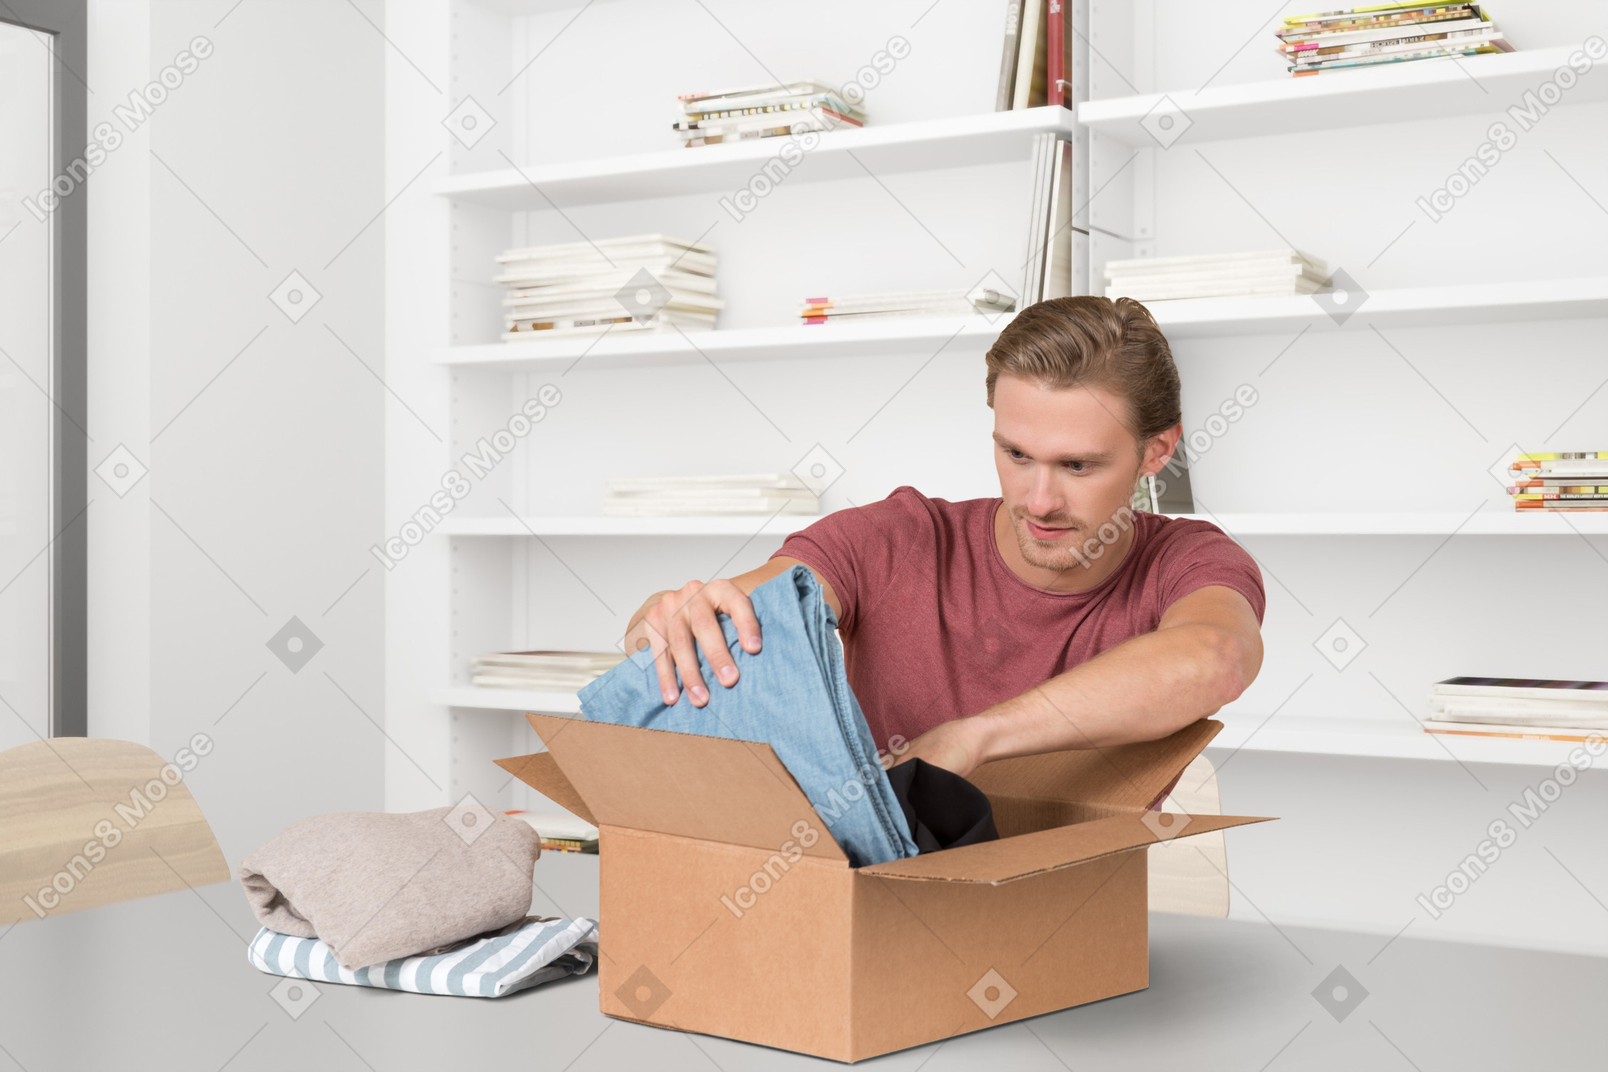 A man opening a box with a pair of jeans in it